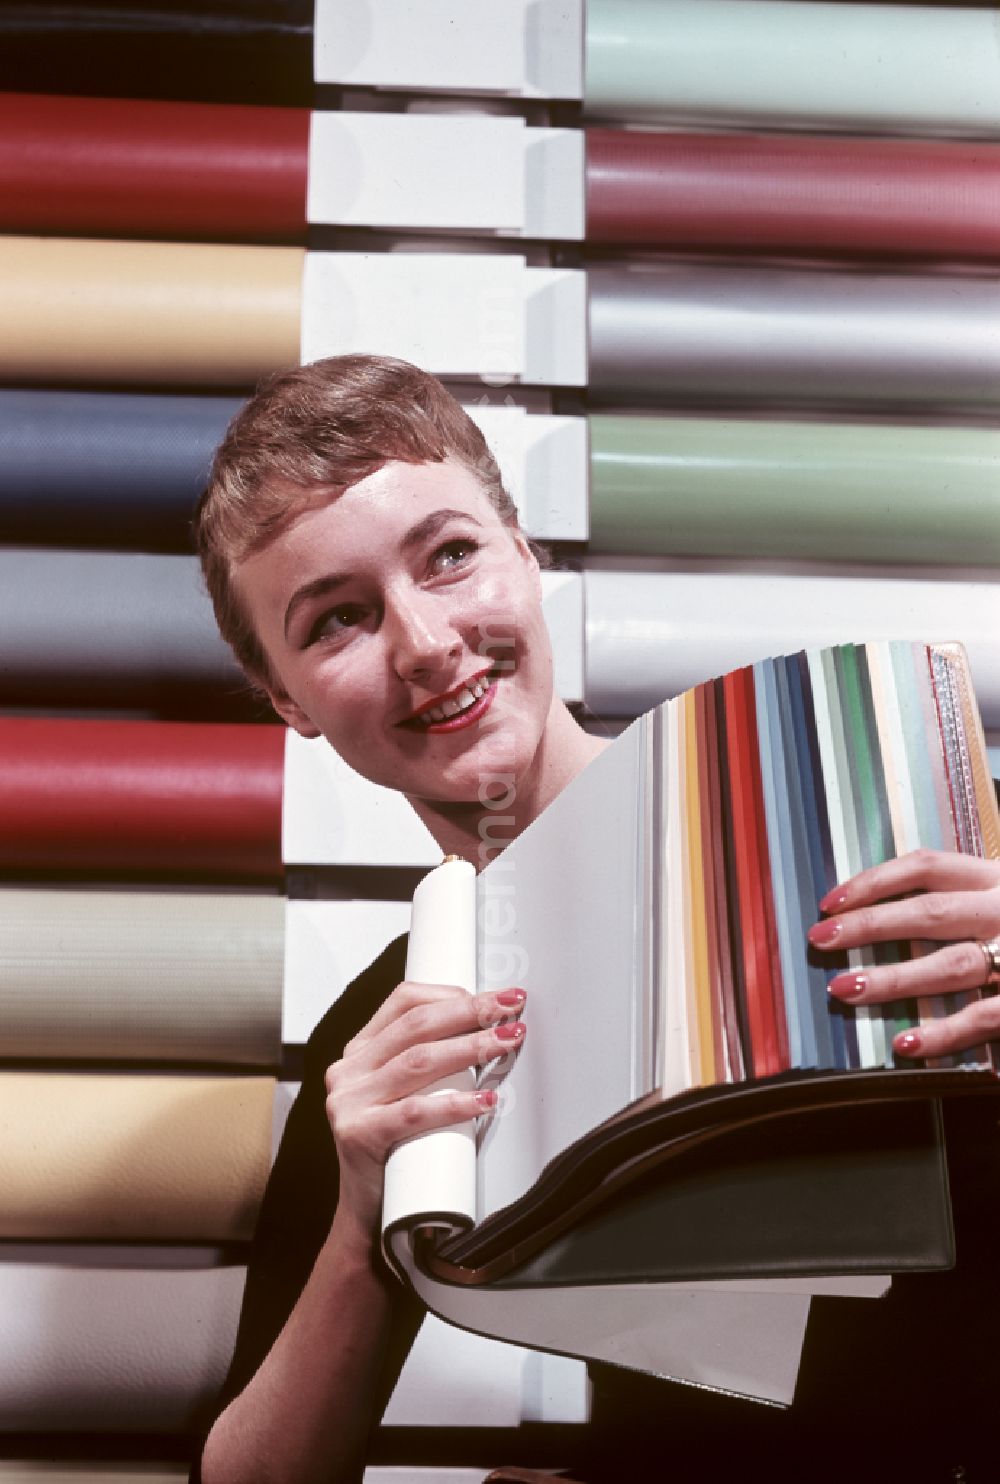 GDR image archive: Coswig - A woman presents a color chart for artificial leather from VEB Cowaplast-Werke Coswig in Coswig, Saxony in the territory of the former GDR, German Democratic Republic